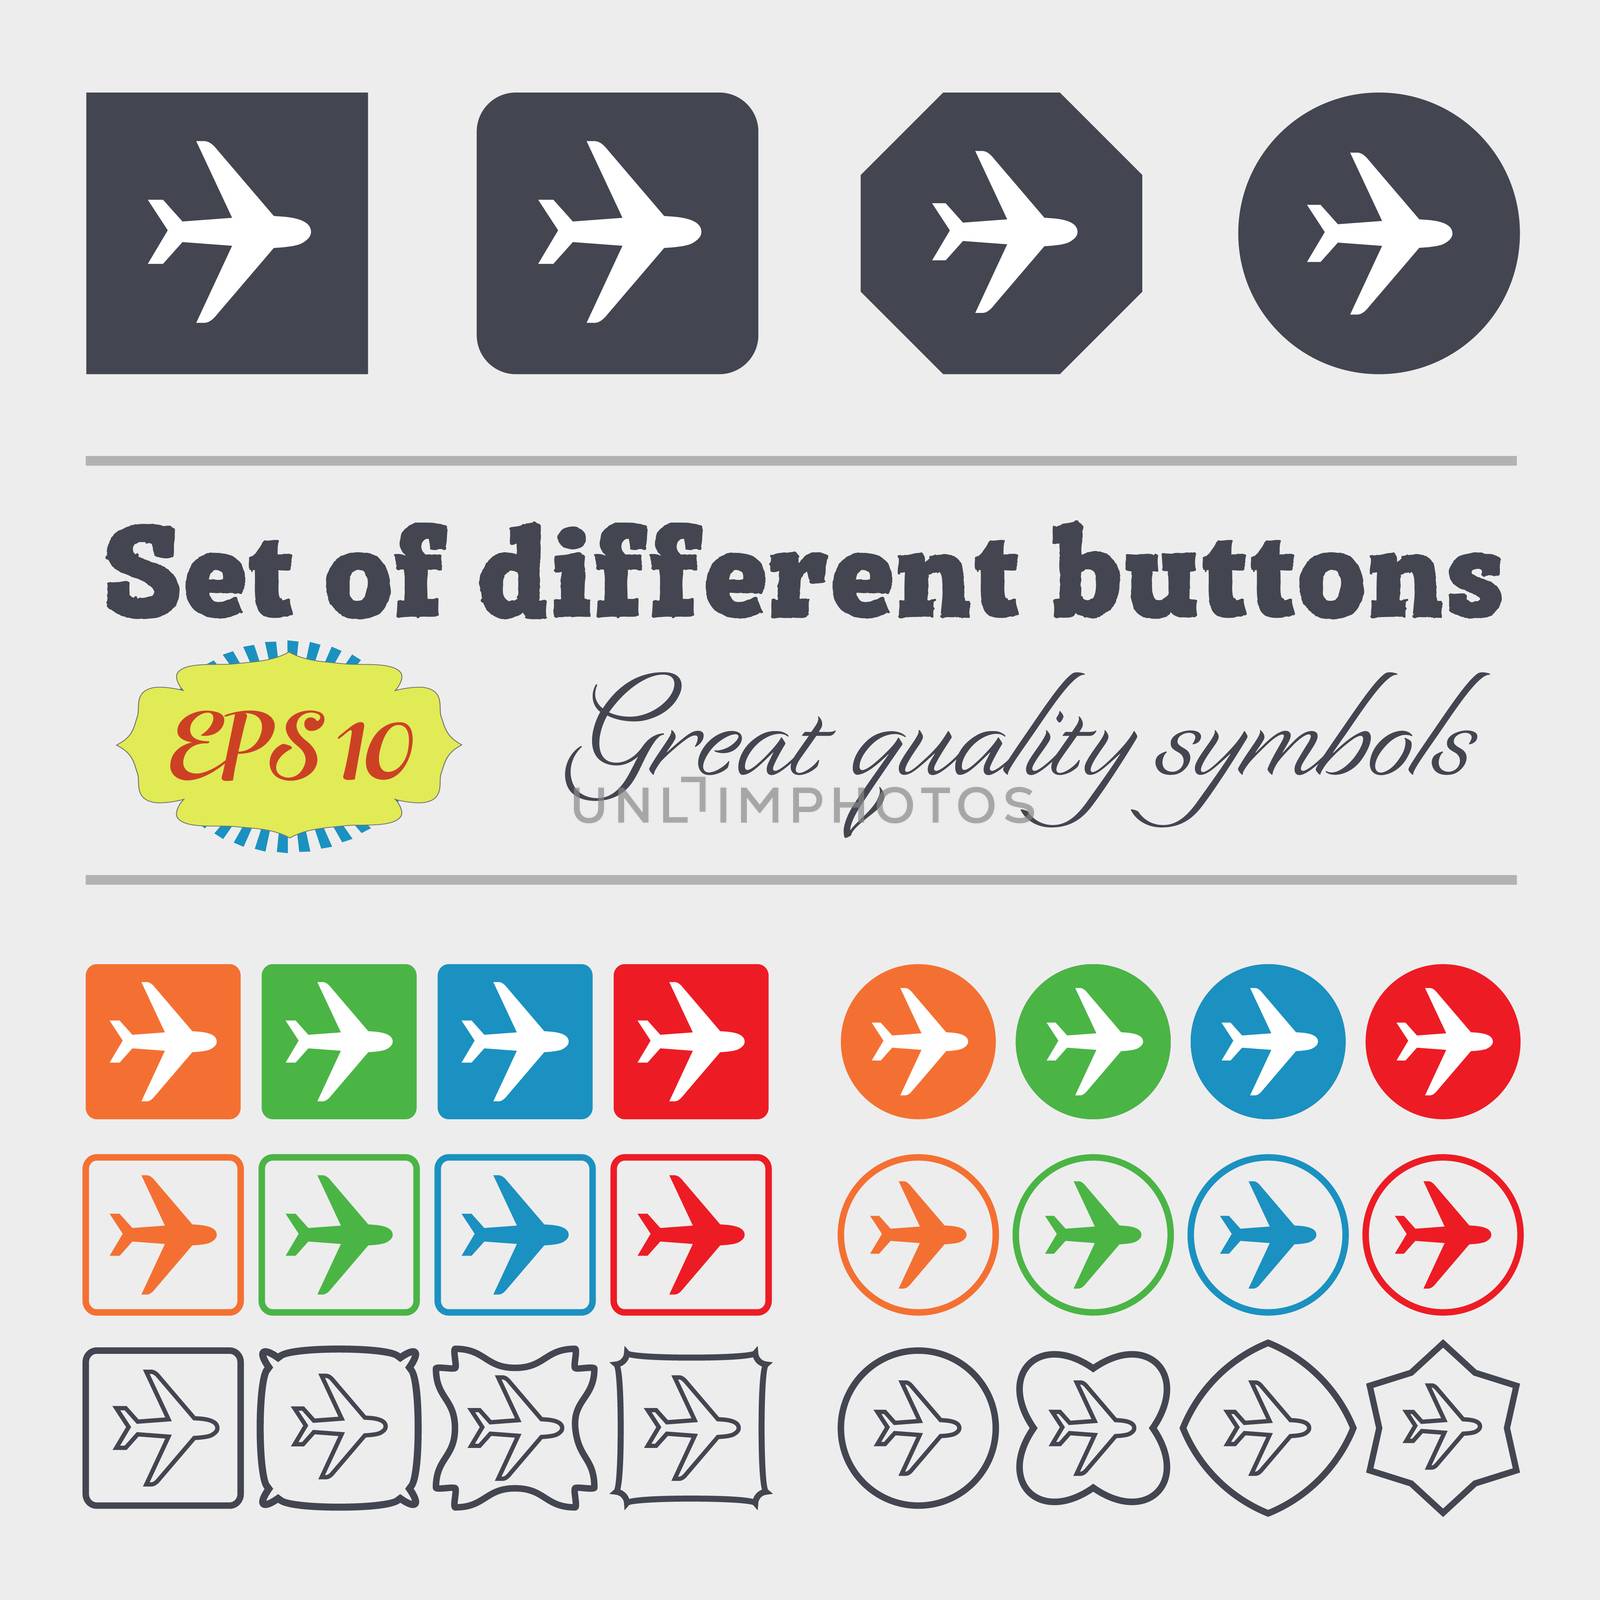 Plane icon sign. Big set of colorful, diverse, high-quality buttons. illustration